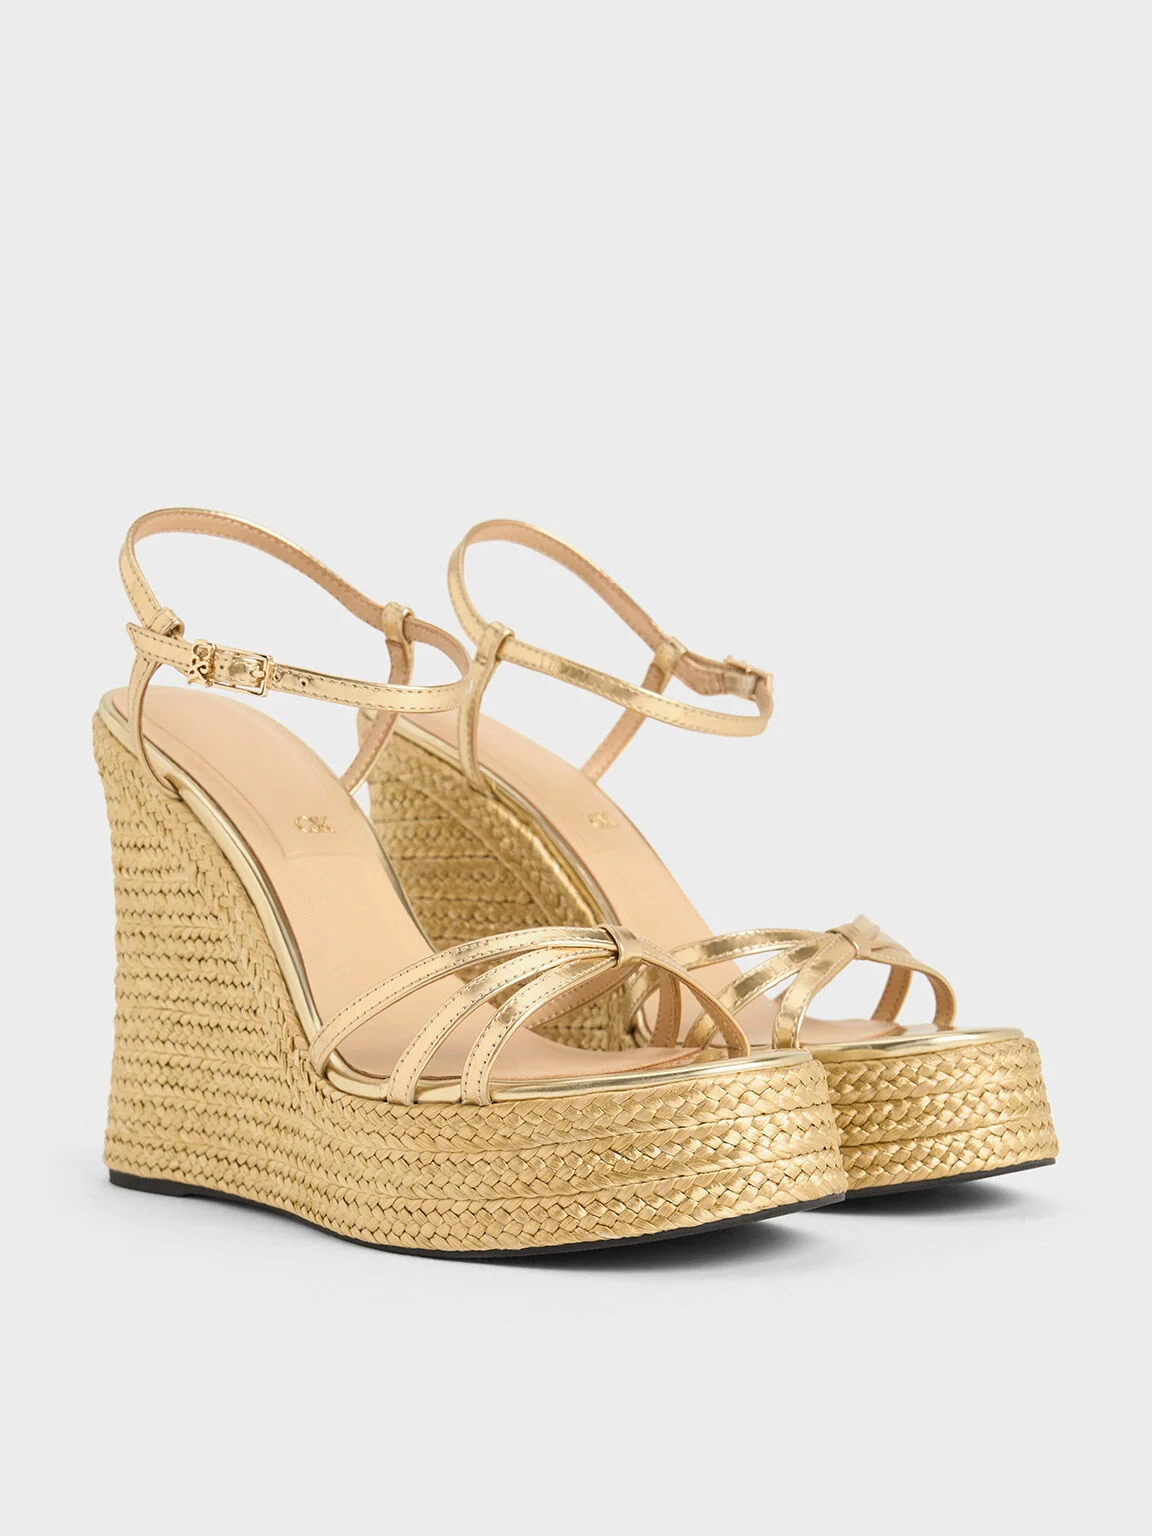 Women’s leather metallic strappy espadrille wedges in gold - CHARLES & KEITH